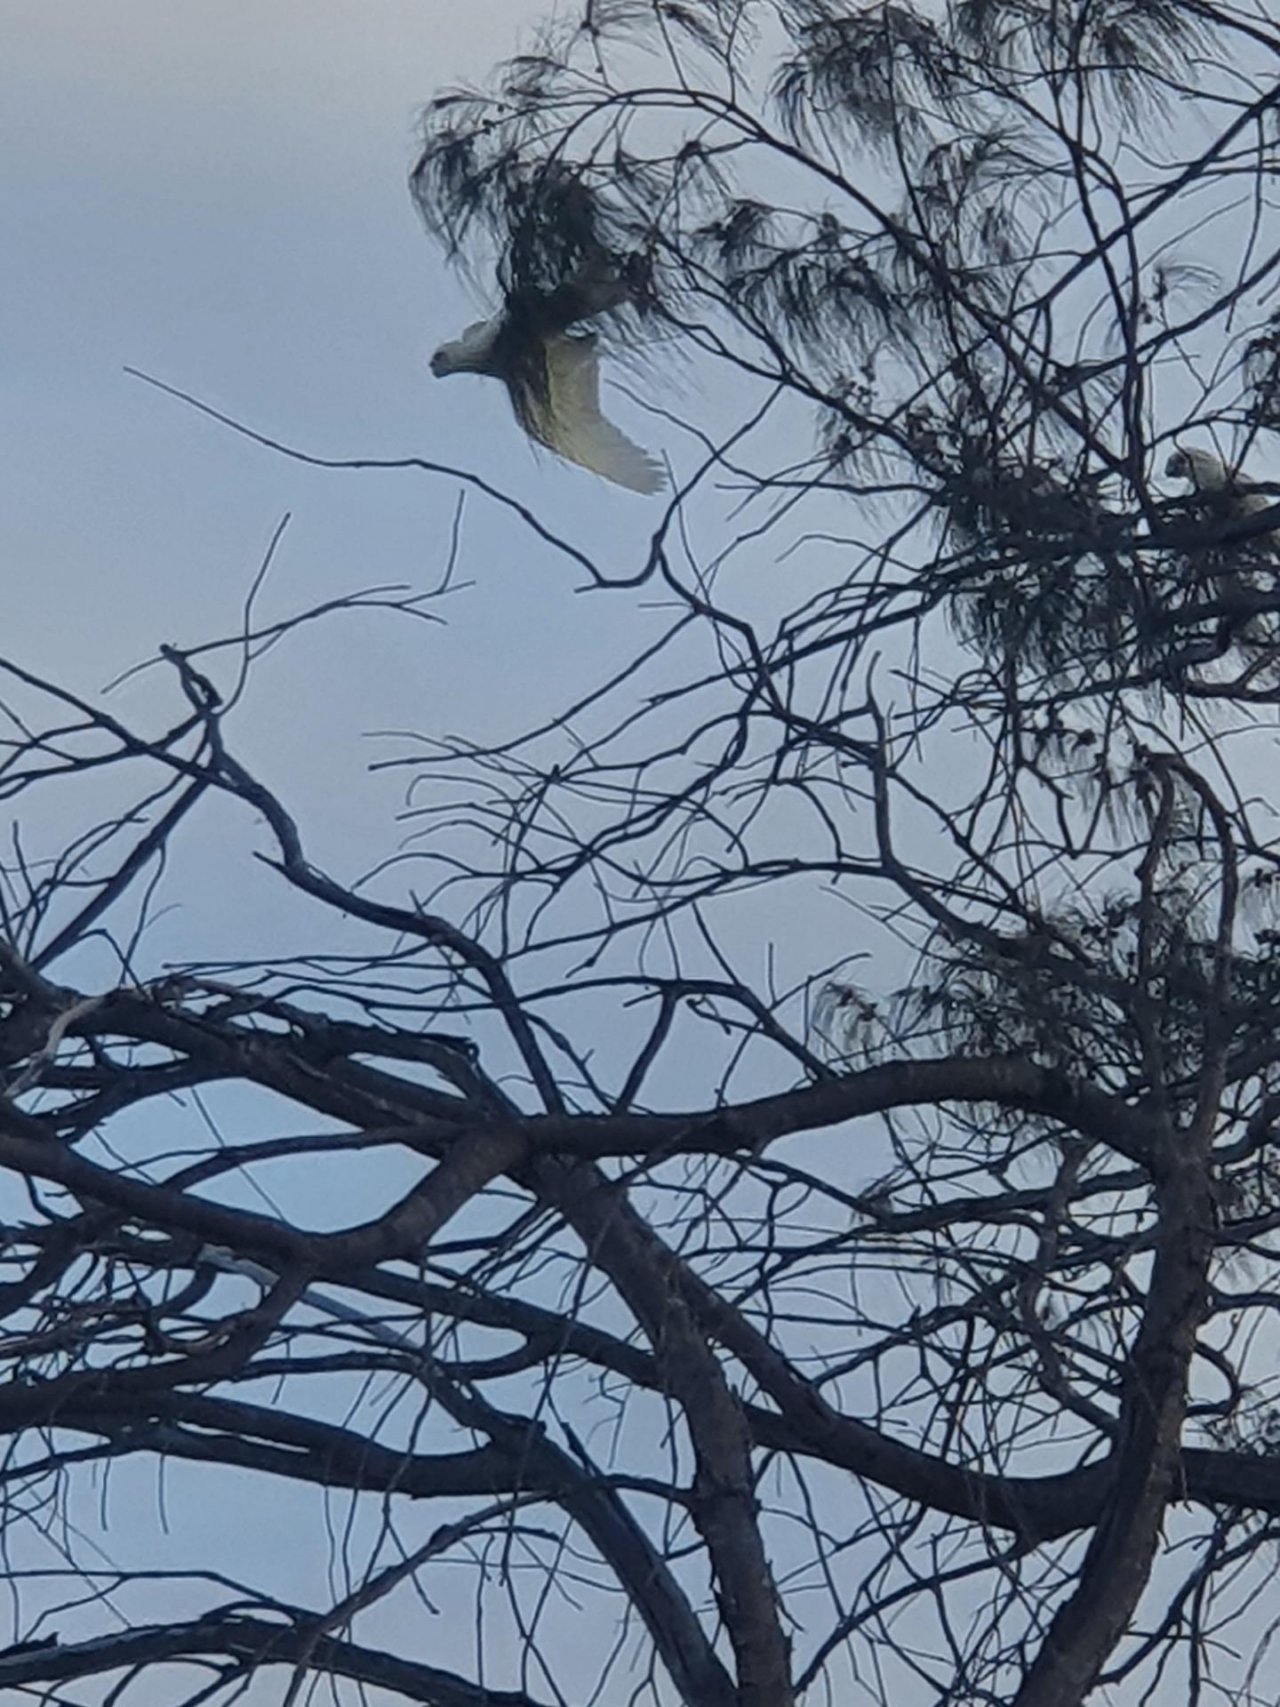 Little Corella in Big City Birds App spotted by Janice Hipperson on 27.12.2020